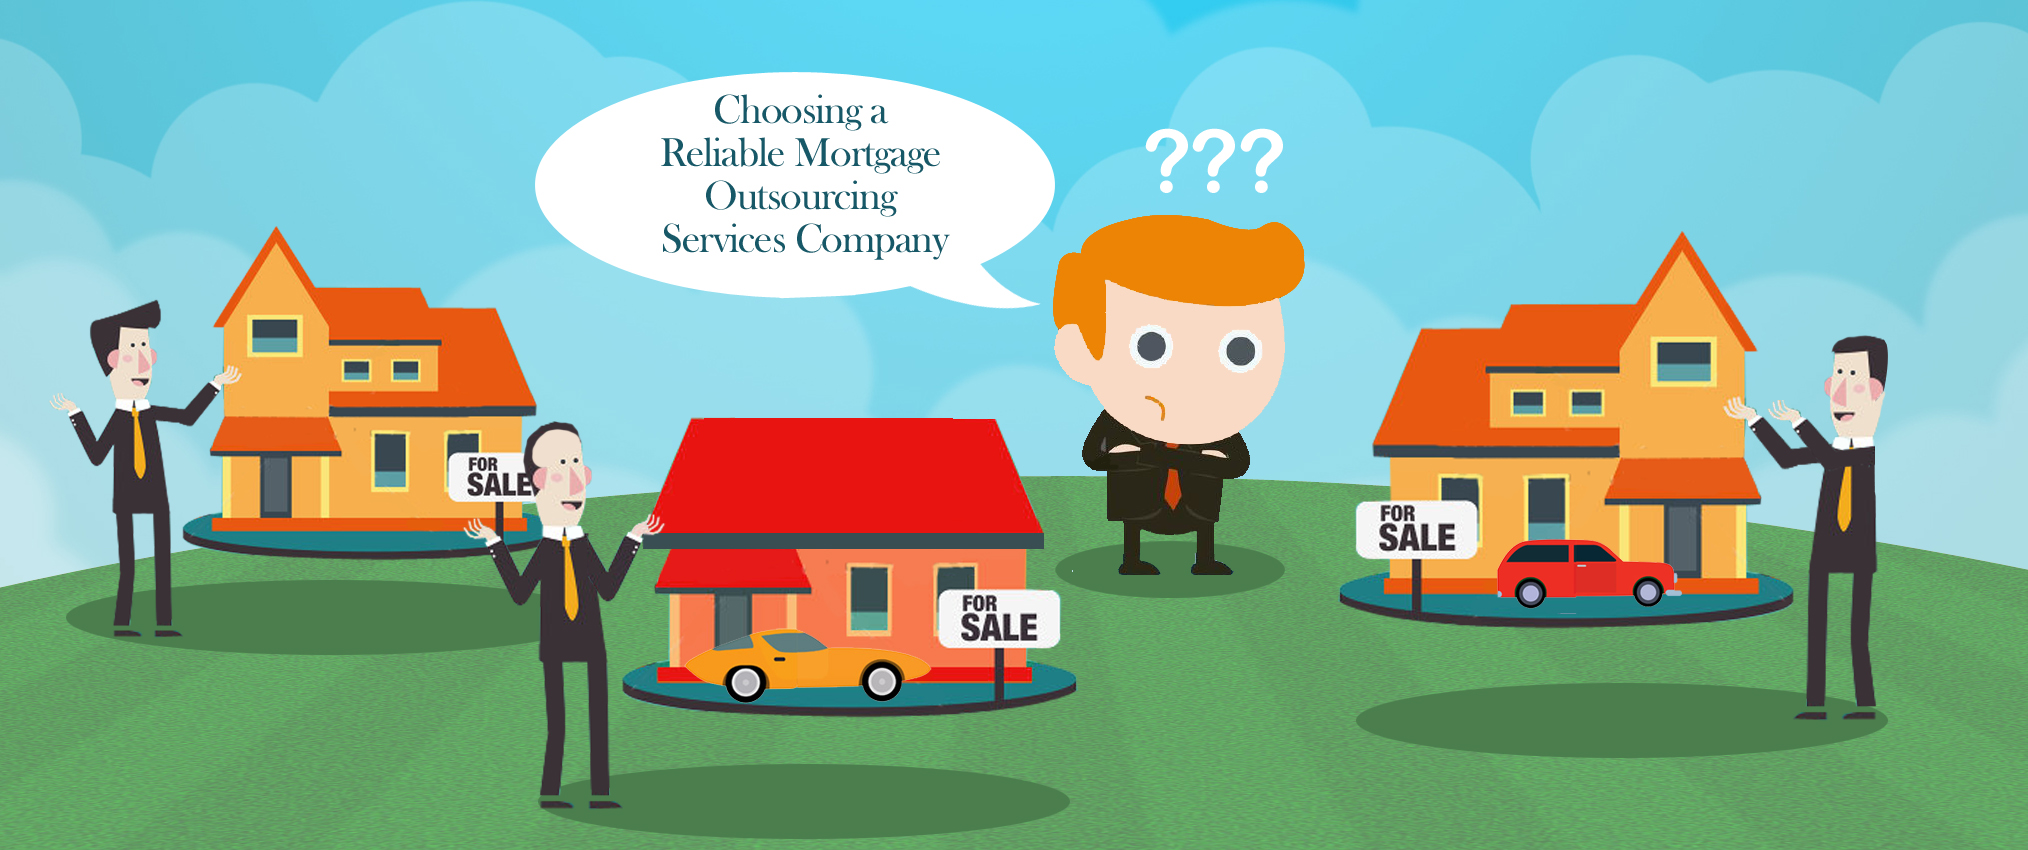 Mortgage Outsourcing Services